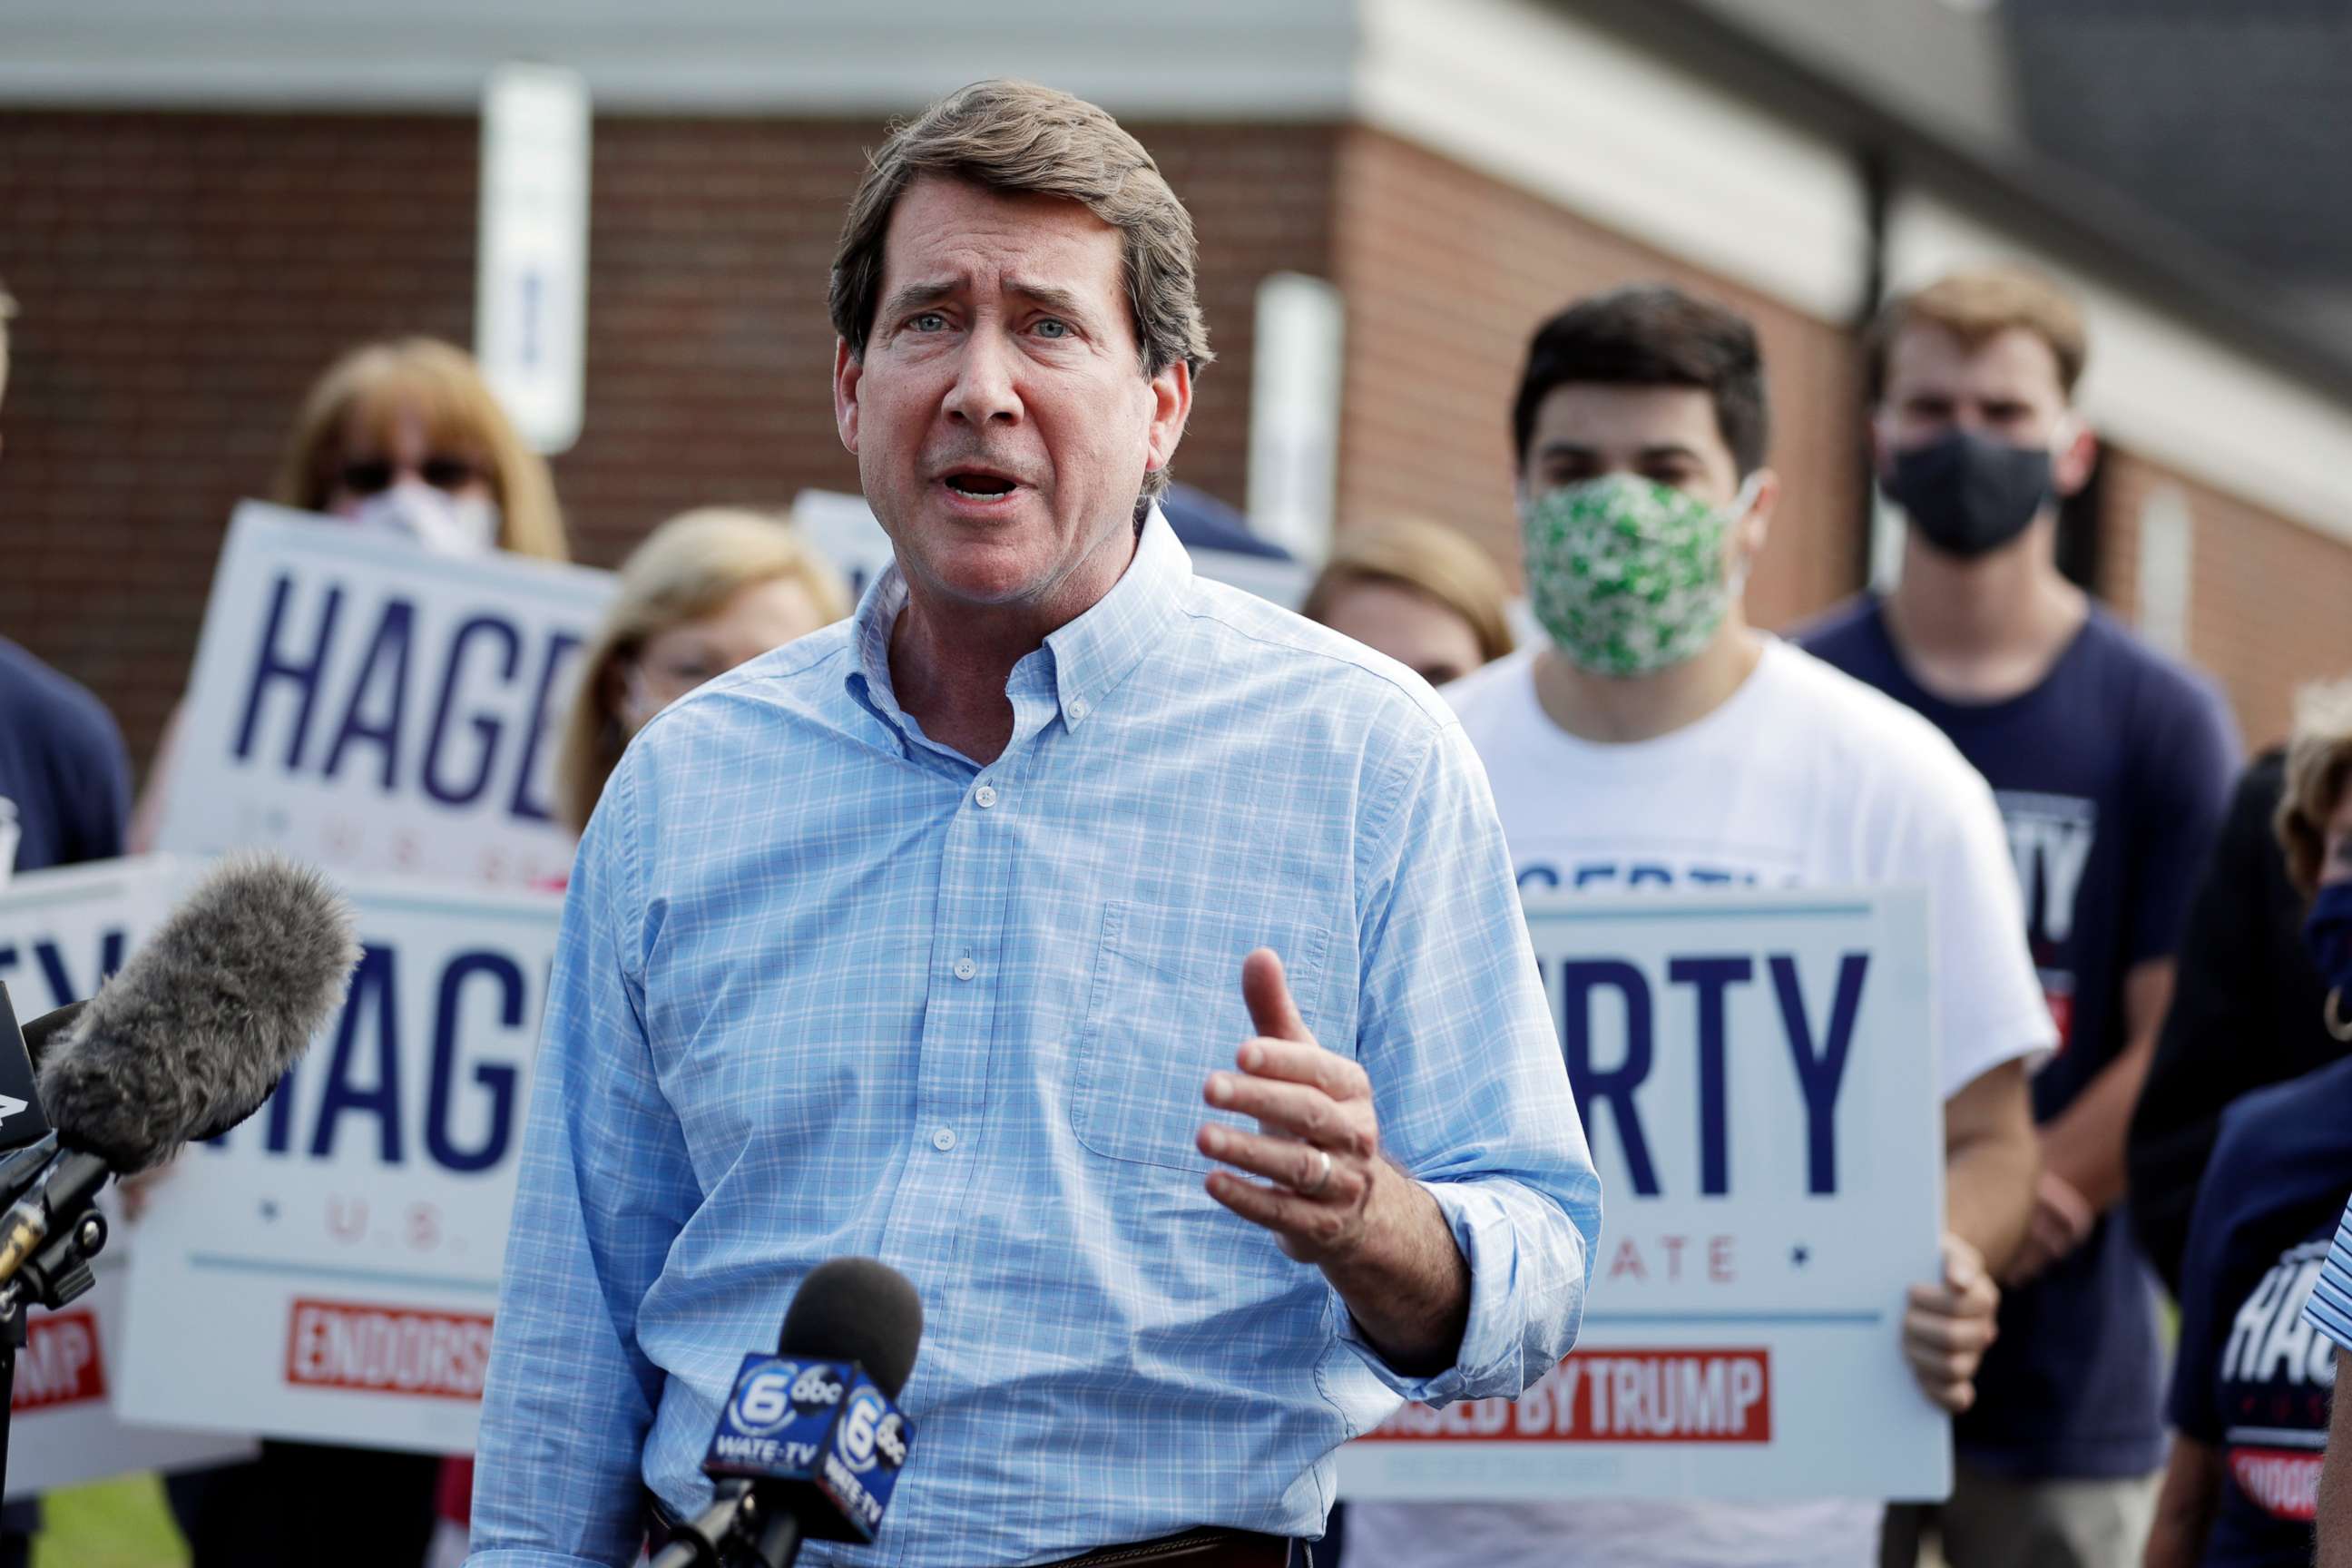 PHOTO: Former U.S. Ambassador to Japan Bill Hagerty speaks at a polling place Thursday, Aug. 6, 2020, in Brentwood, Tenn.